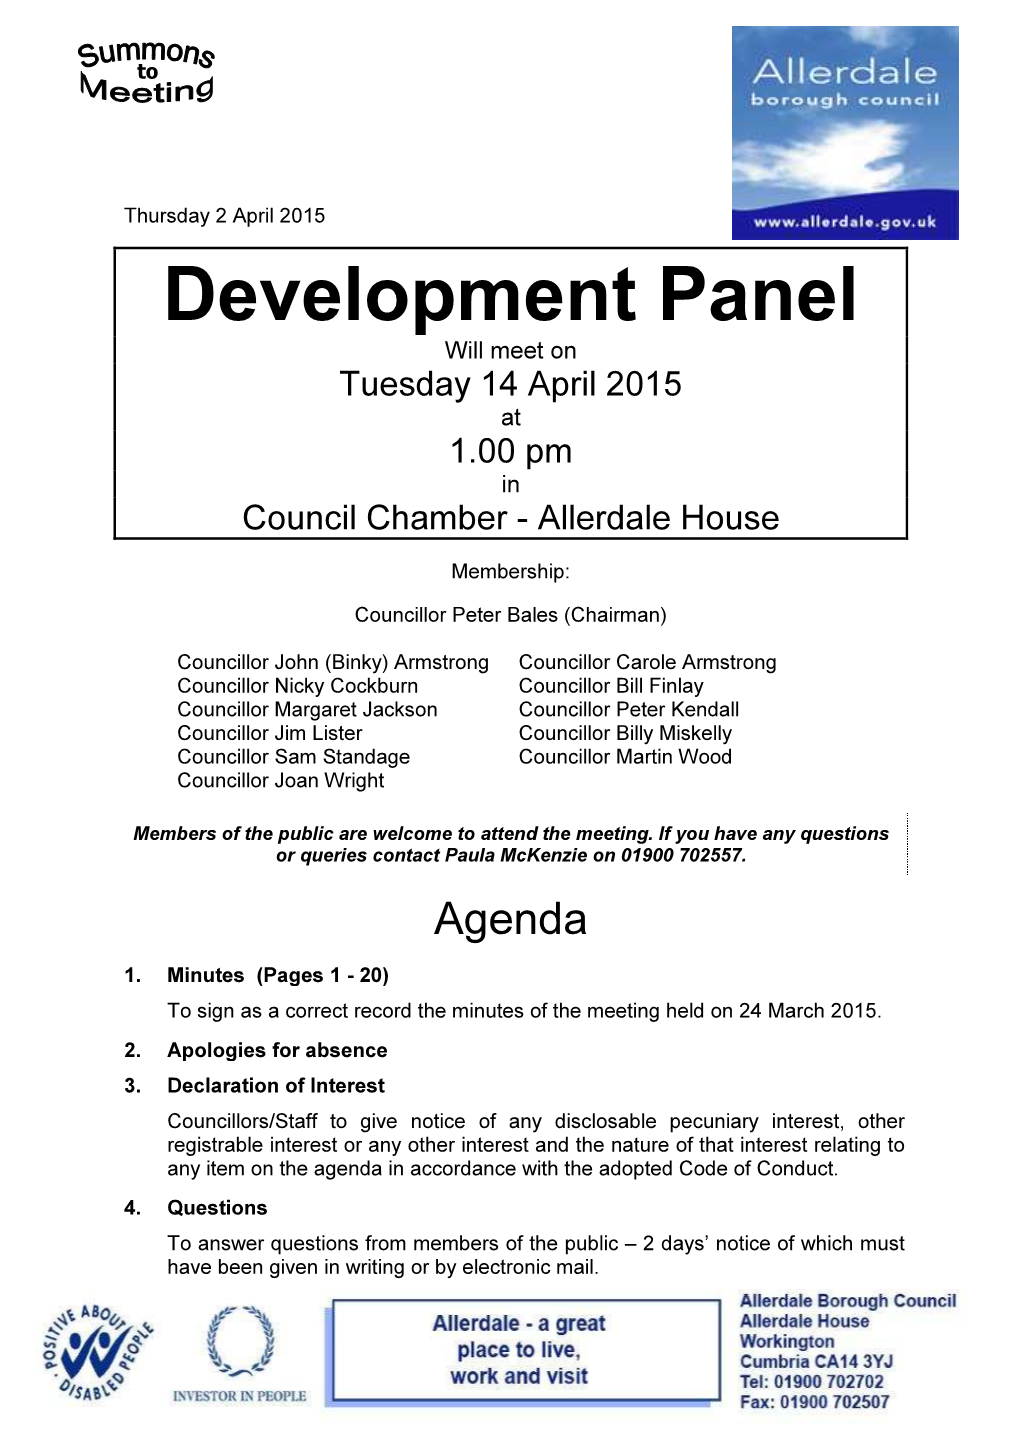 Development Panel Will Meet on Tuesday 14 April 2015 at 1.00 Pm in Council Chamber - Allerdale House